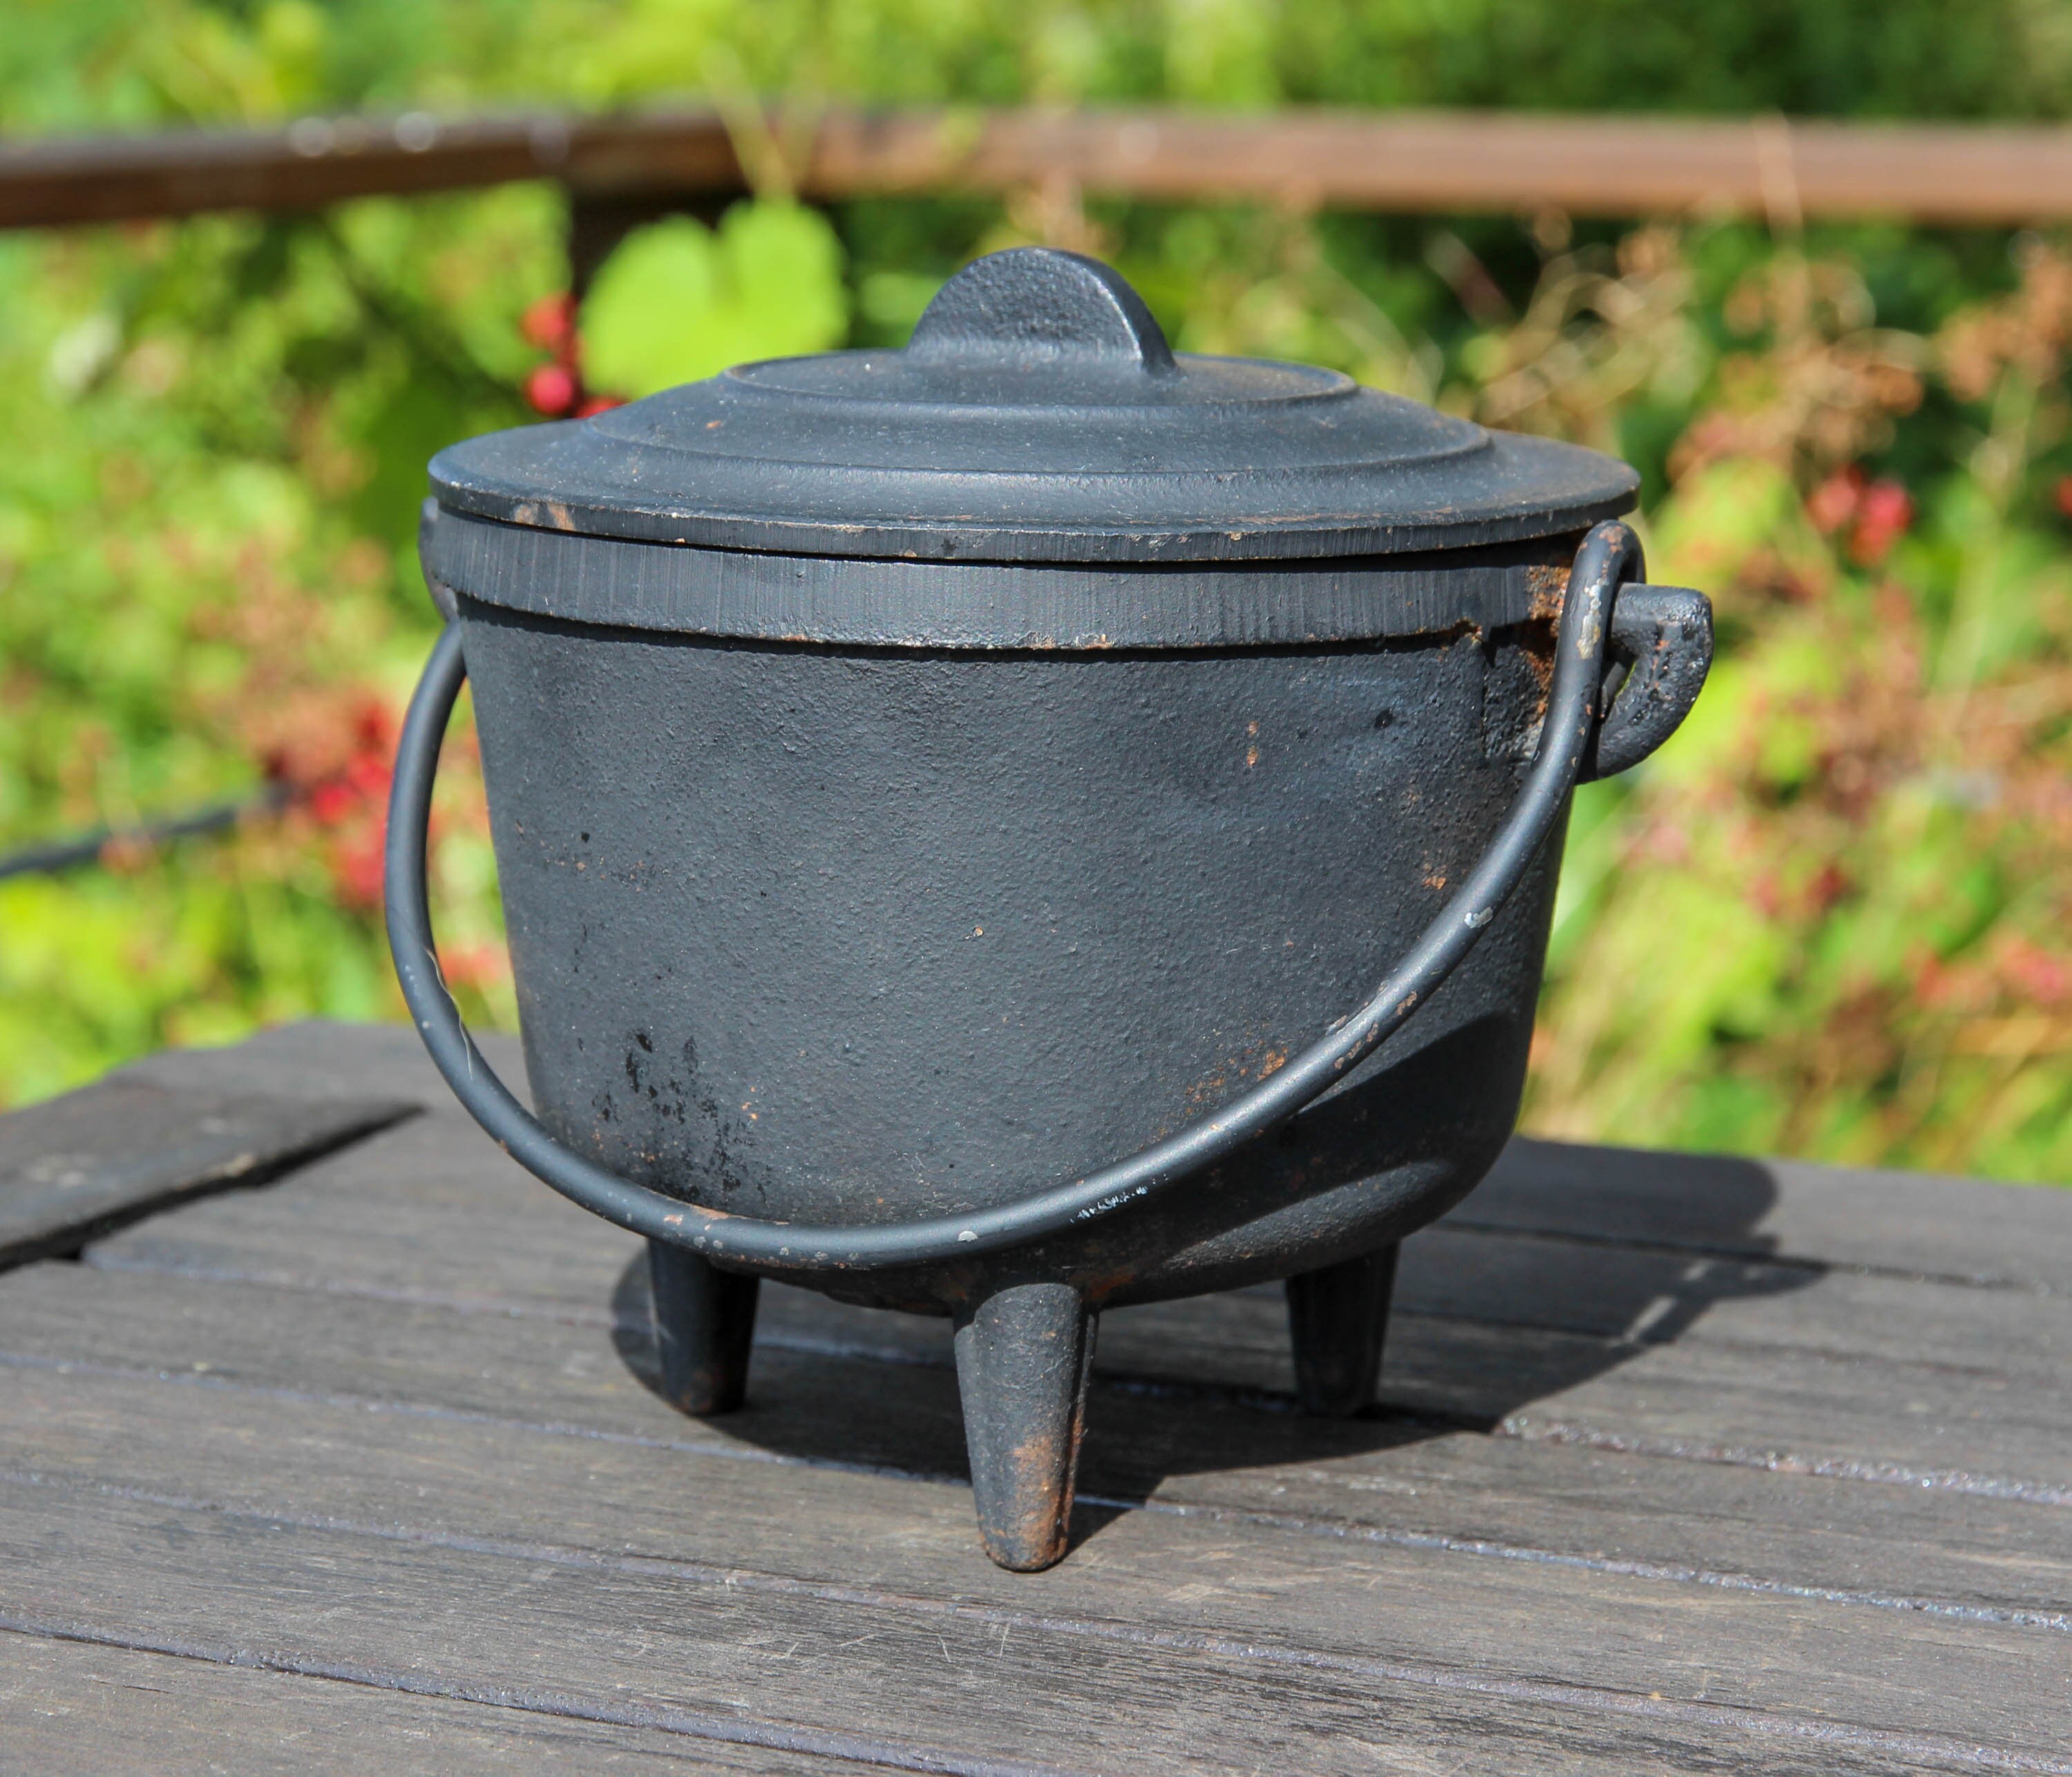 Antique French 4.5 Litre Heavy 4kg Cast Iron Oval Cocotte Cooking Pot With  Lid / Late 1800s Early 1900s Size 10 Dutch Oven Casserole 